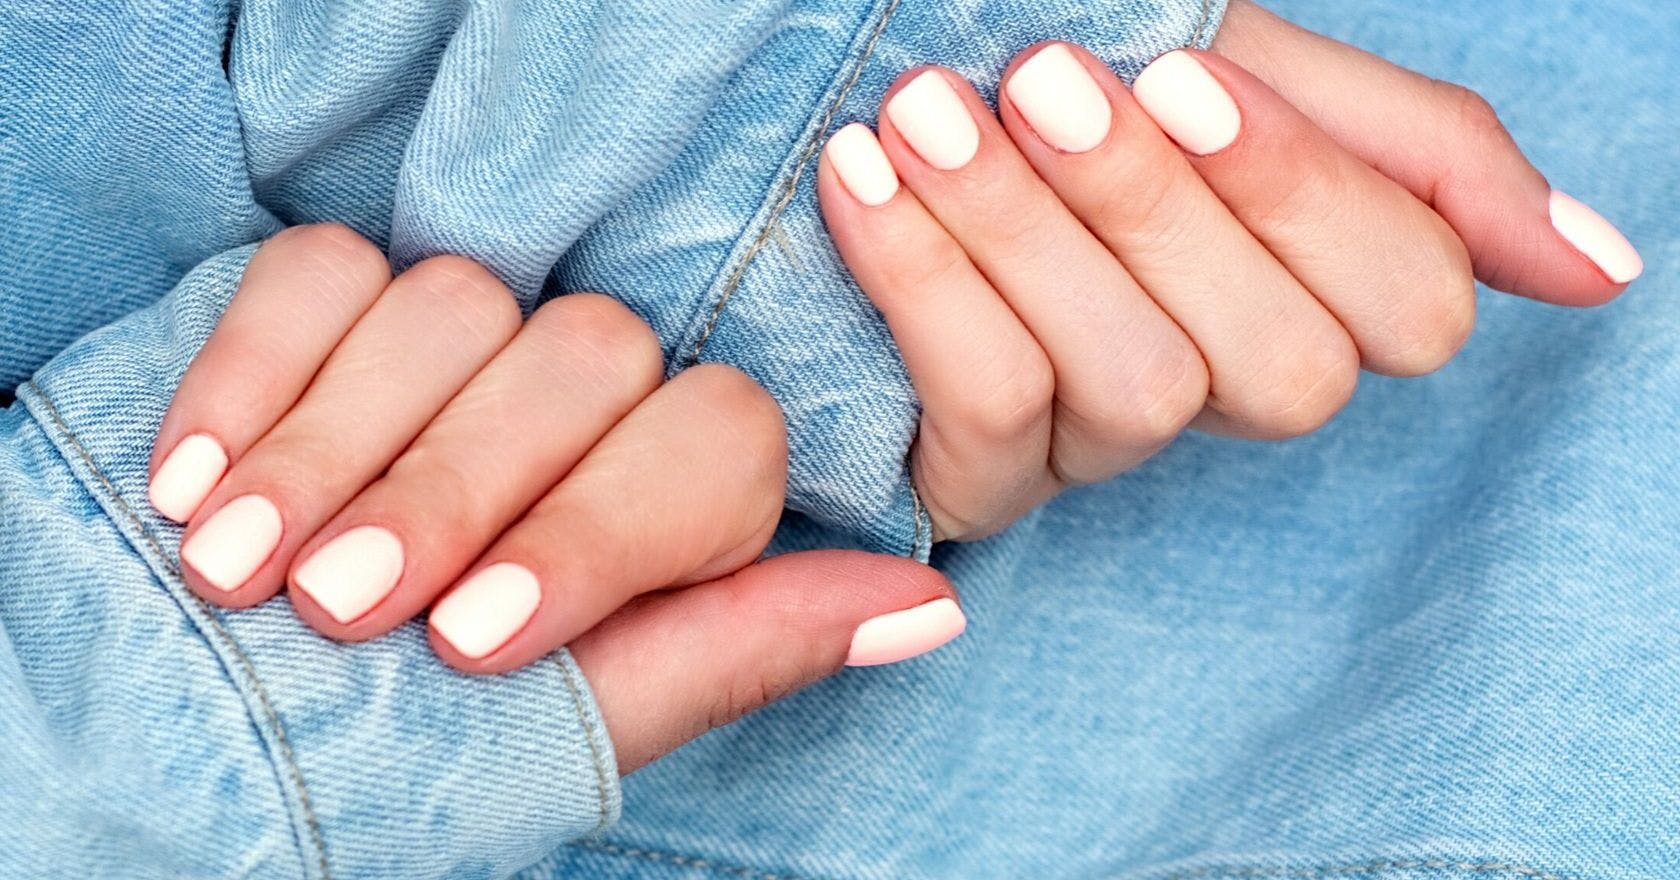 4. Nail Designs That Help Nails Grow Stronger - wide 6